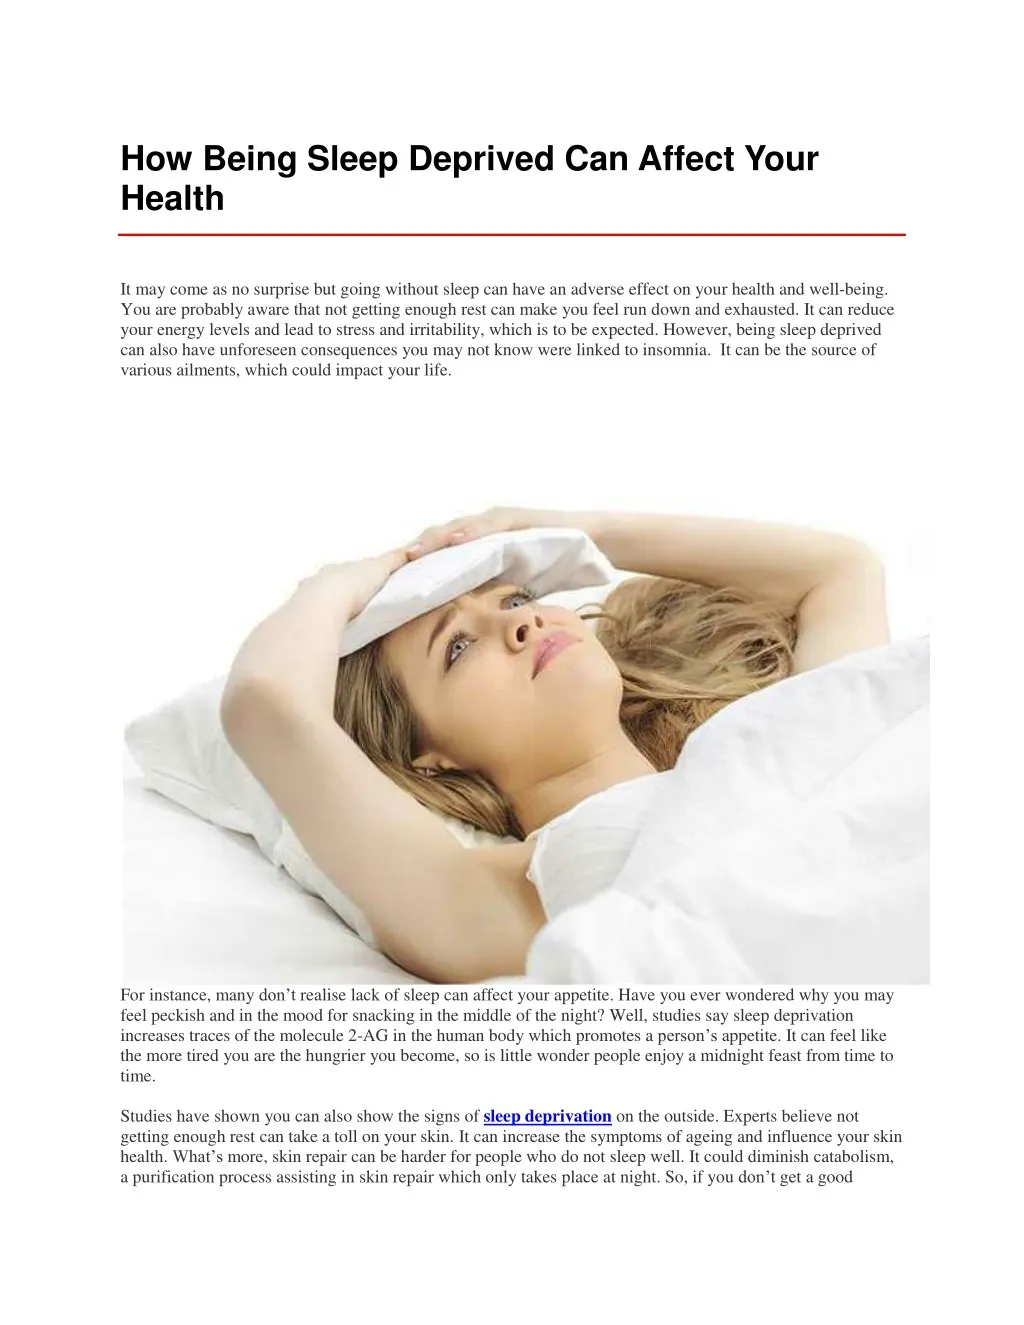 how being sleep deprived can affect your health